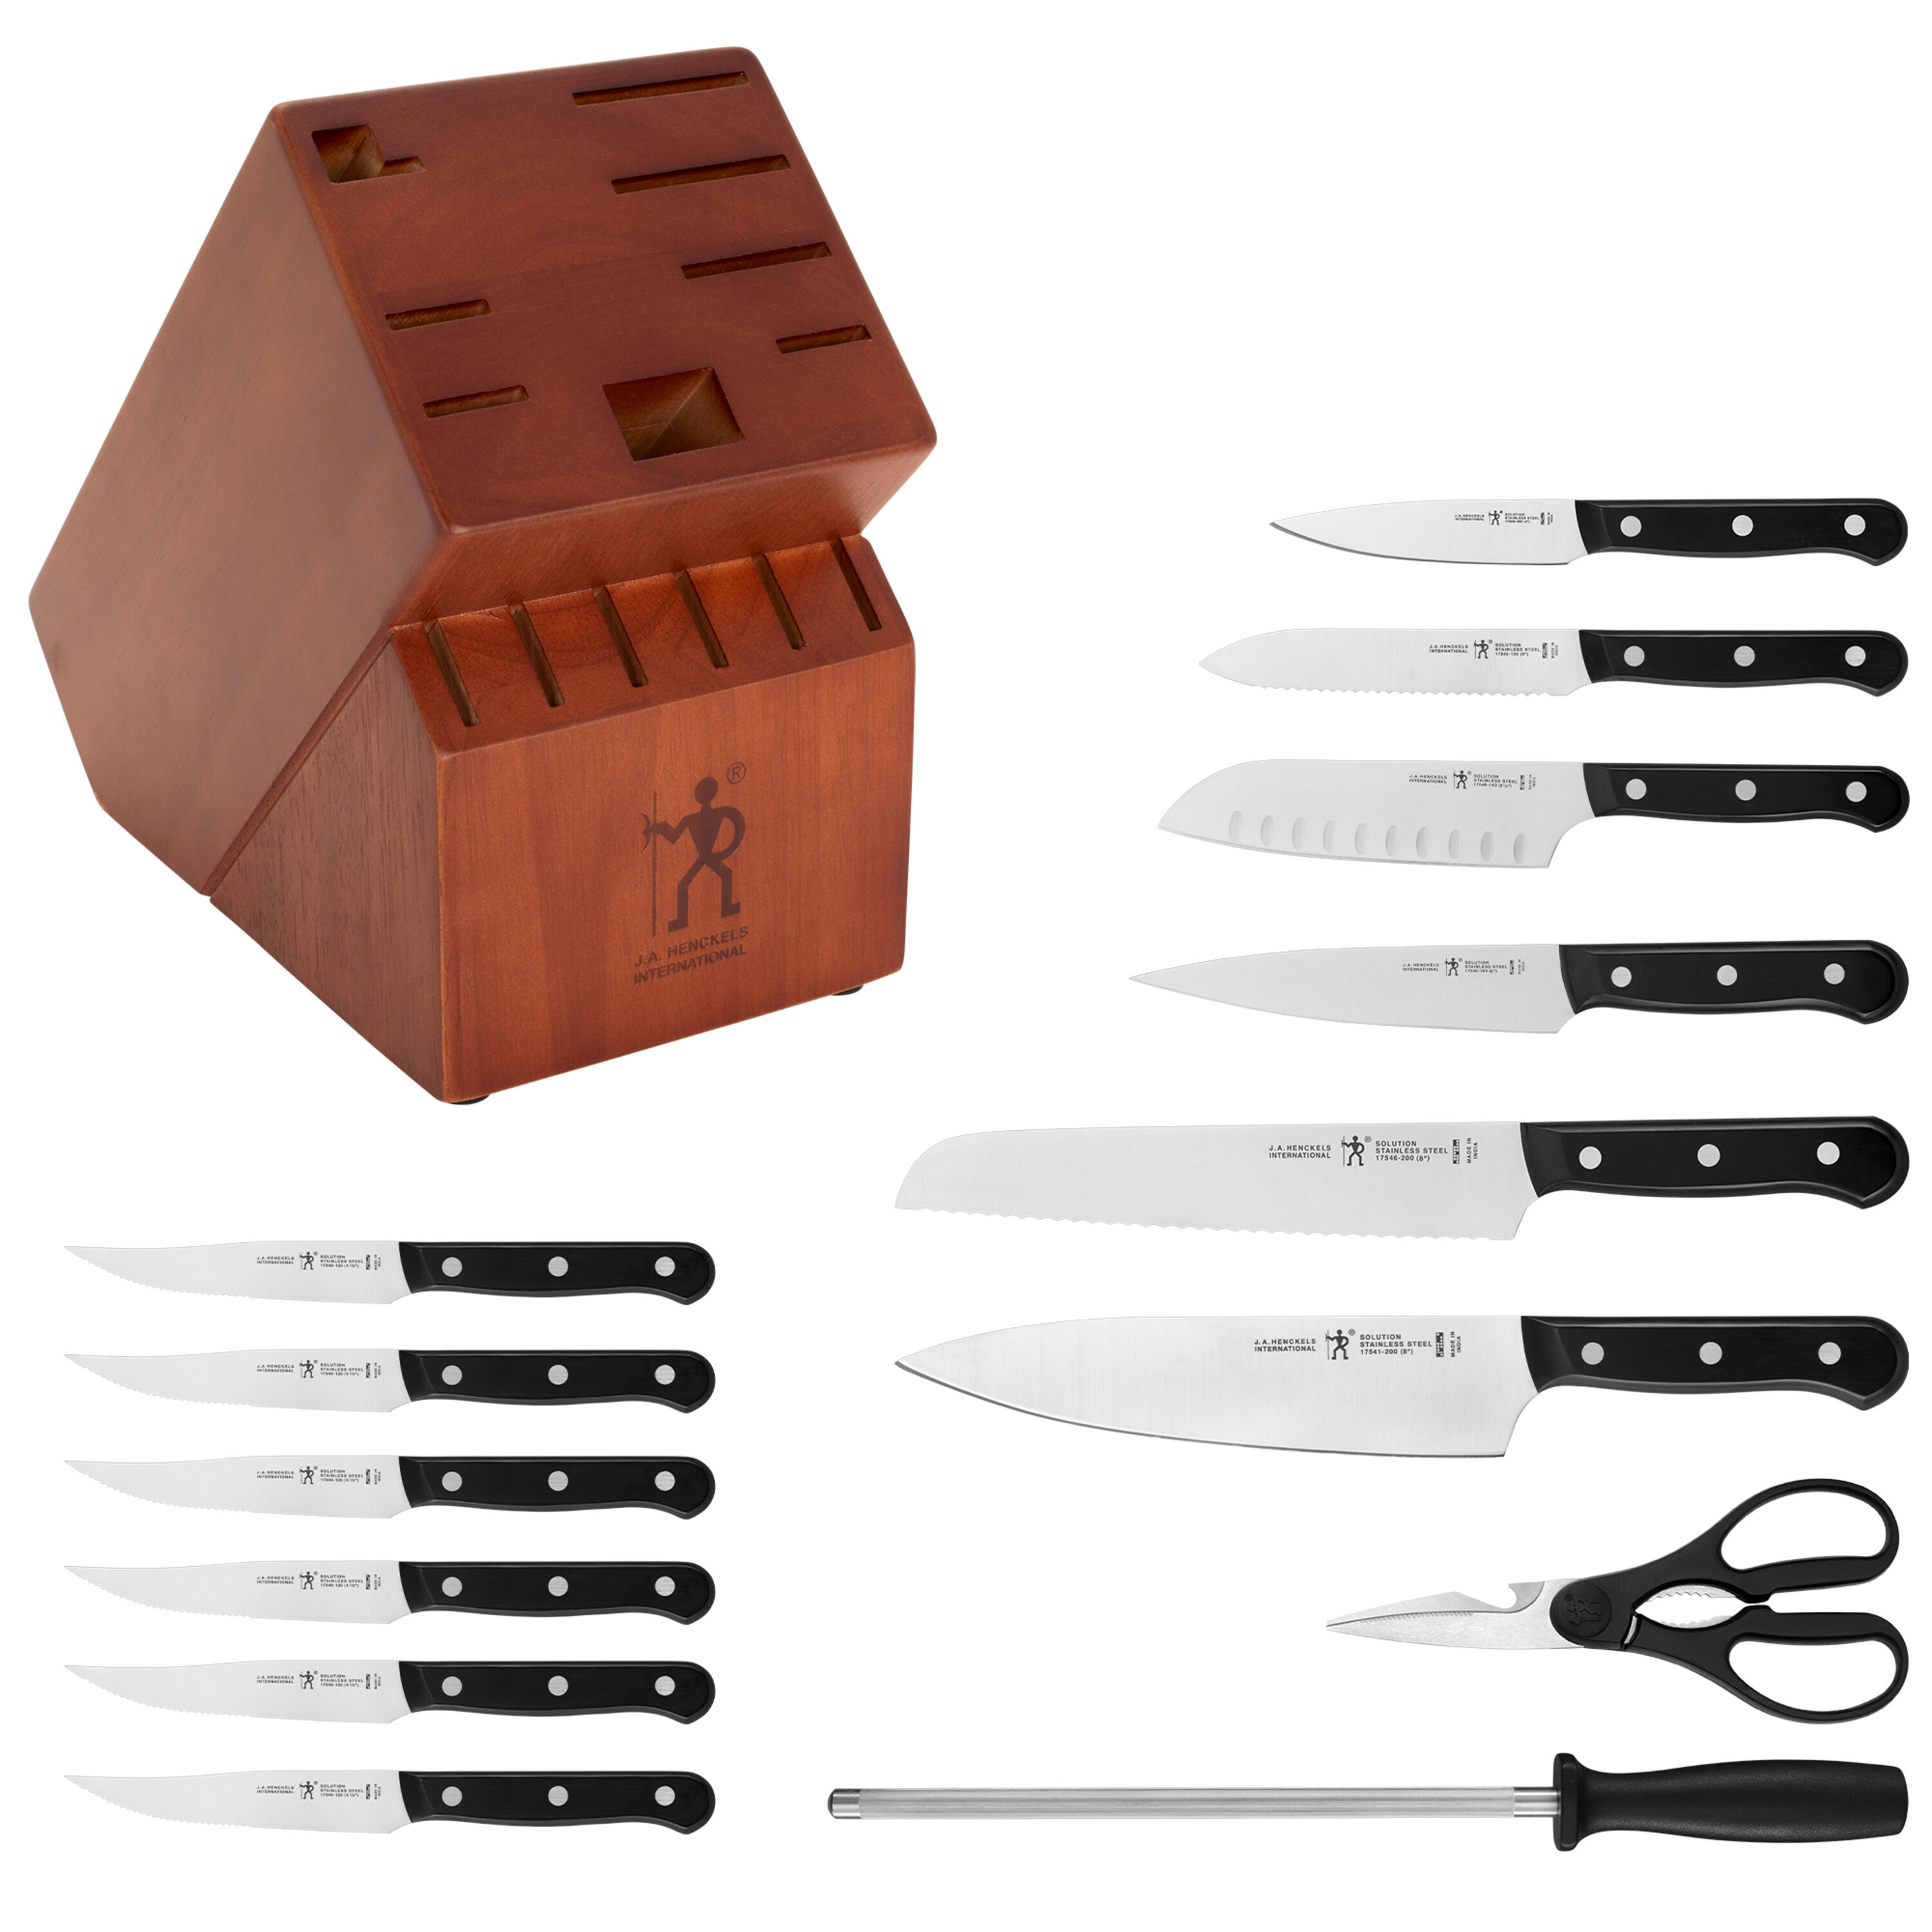  HENCKELS Premium Quality 15-Piece Knife Set with Block,  Razor-Sharp, German Engineered Knife Informed by over 100 Years of  Masterful Knife Making, Lightweight and Strong, Dishwasher Safe: Block Knife  Sets: Home 